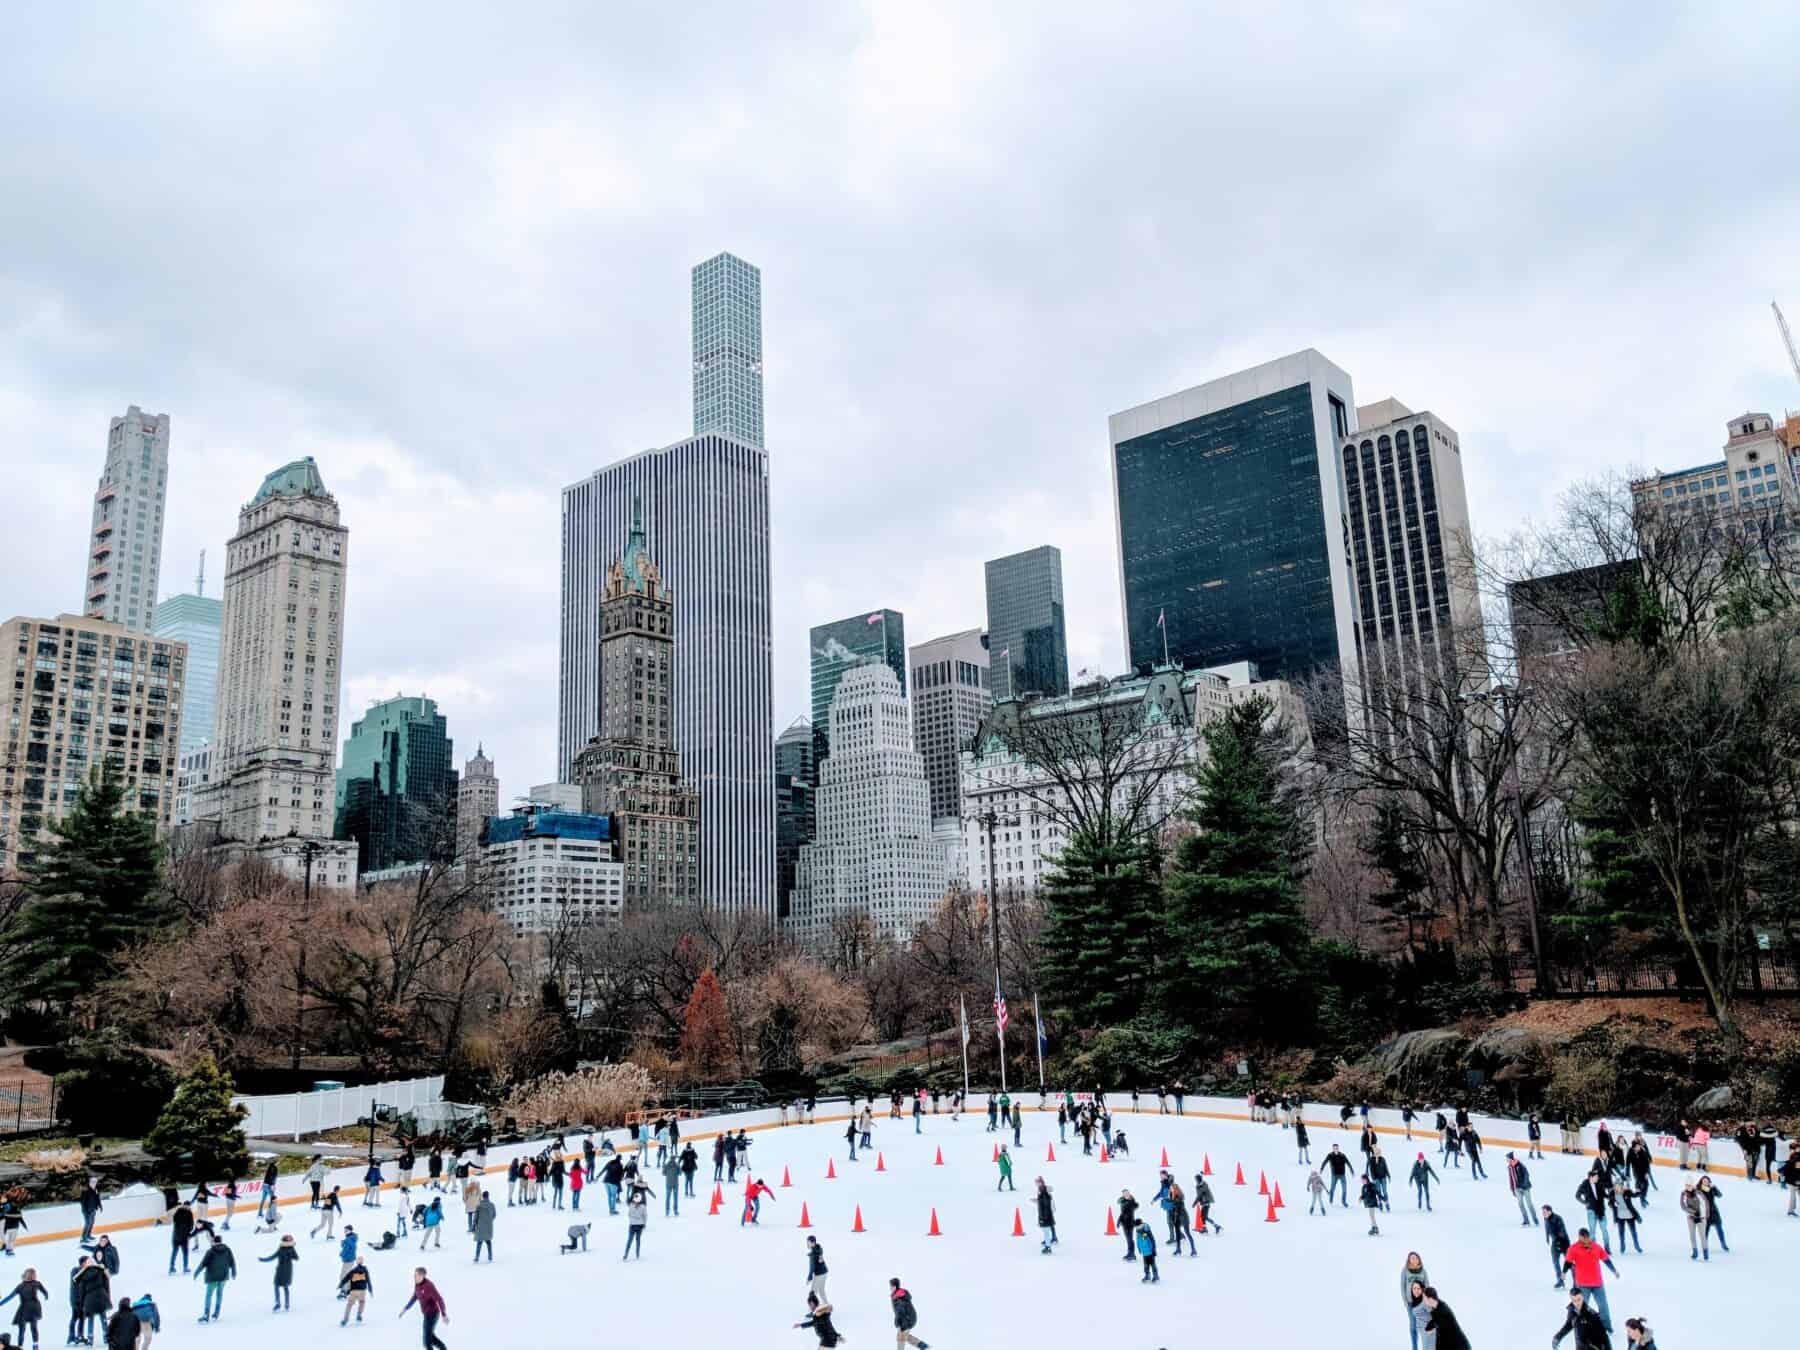 Wollman Rink in Central Park